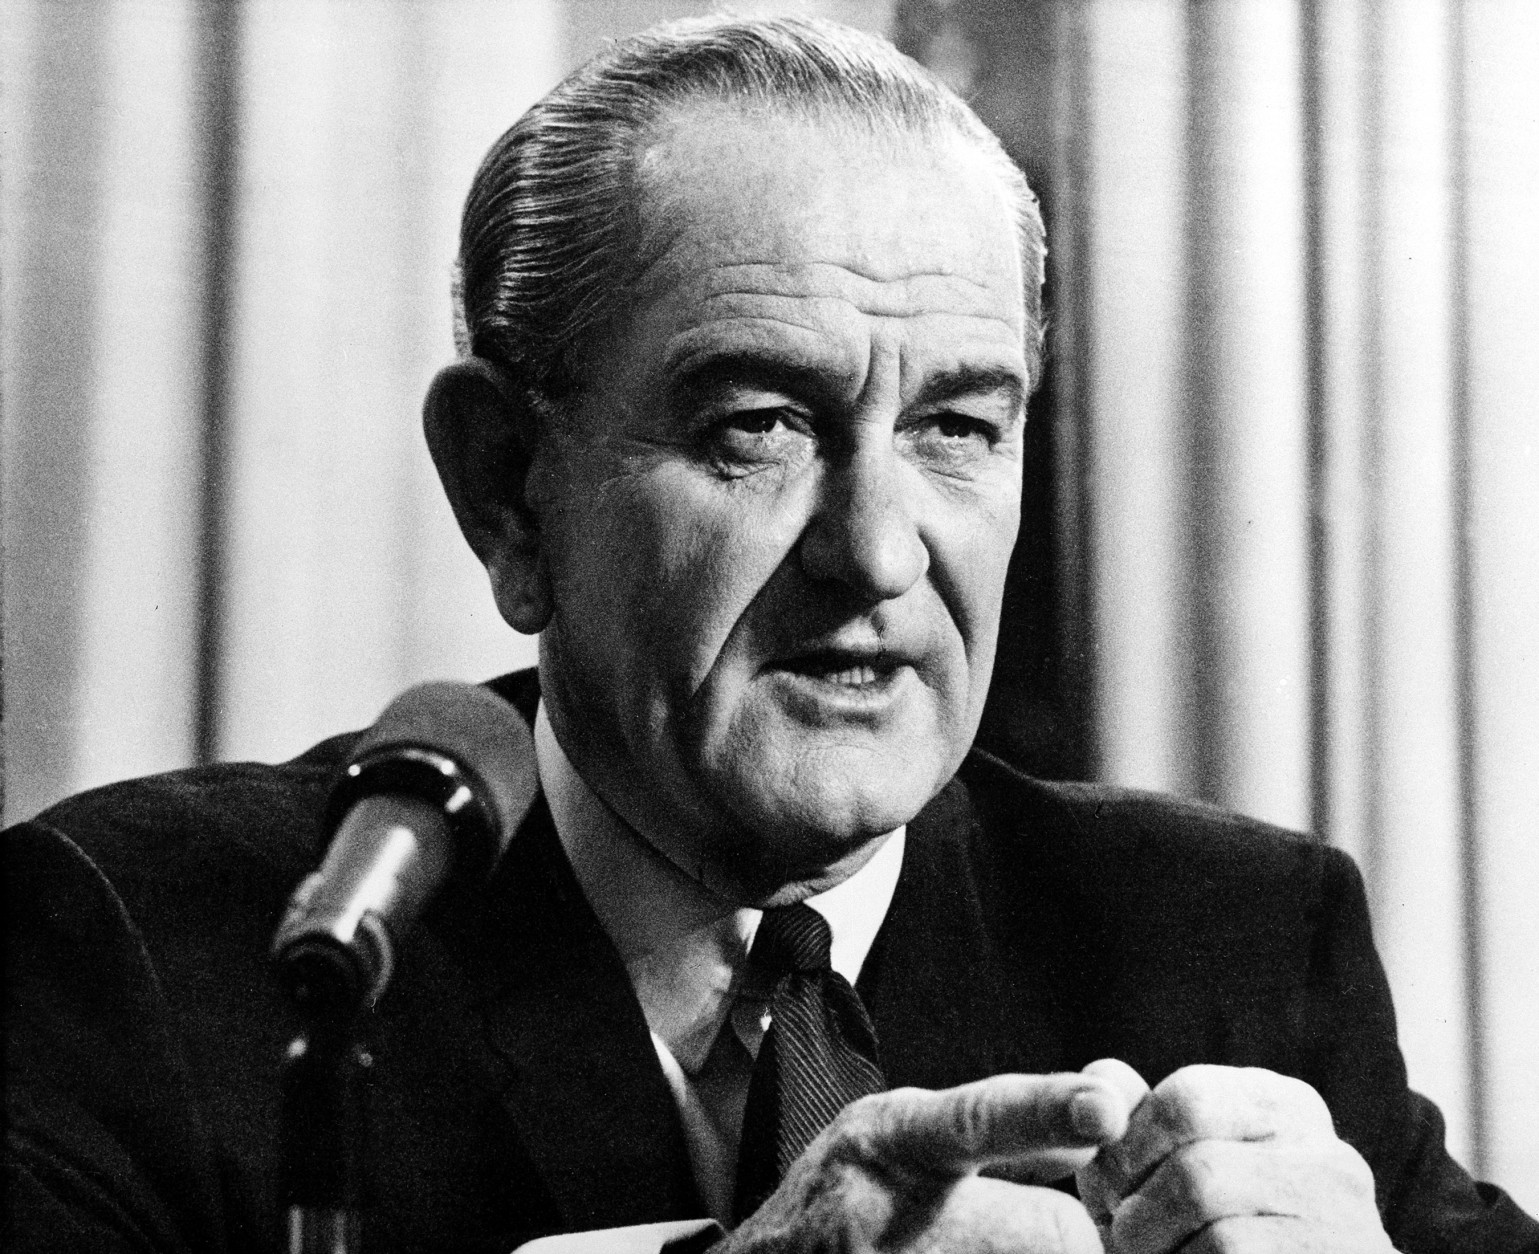 On this date in 1965, President Lyndon B. Johnson announced he was increasing the number of American troops in South Vietnam from 75,000 to 125,000 "almost immediately." Here,  Johnson addresses the nation in a radio and television broadcast from his desk at the White House in Washington, D.C., on March 31, 1968.   In his speech the president talked about plans to de-escalate the war in North Vietnam and his plans not to run for re-election.  (AP Photo)